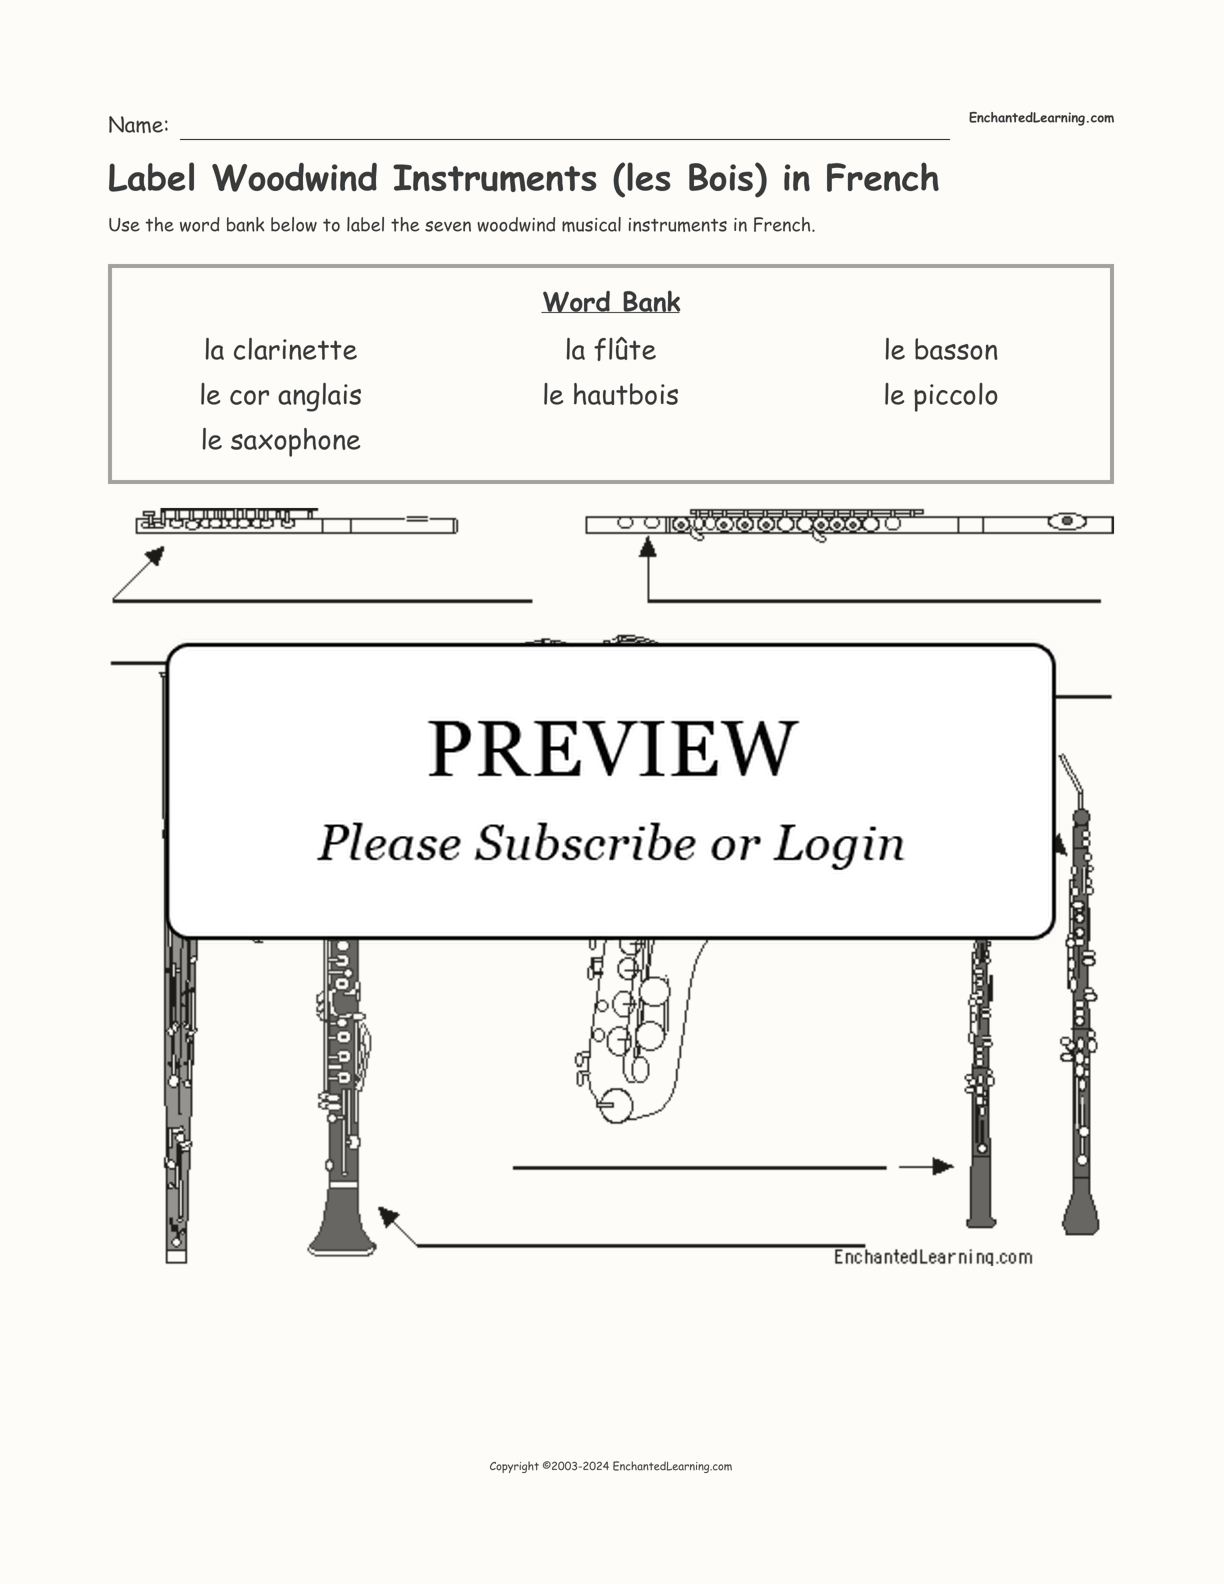 Label Woodwind Instruments (les Bois) in French interactive worksheet page 1